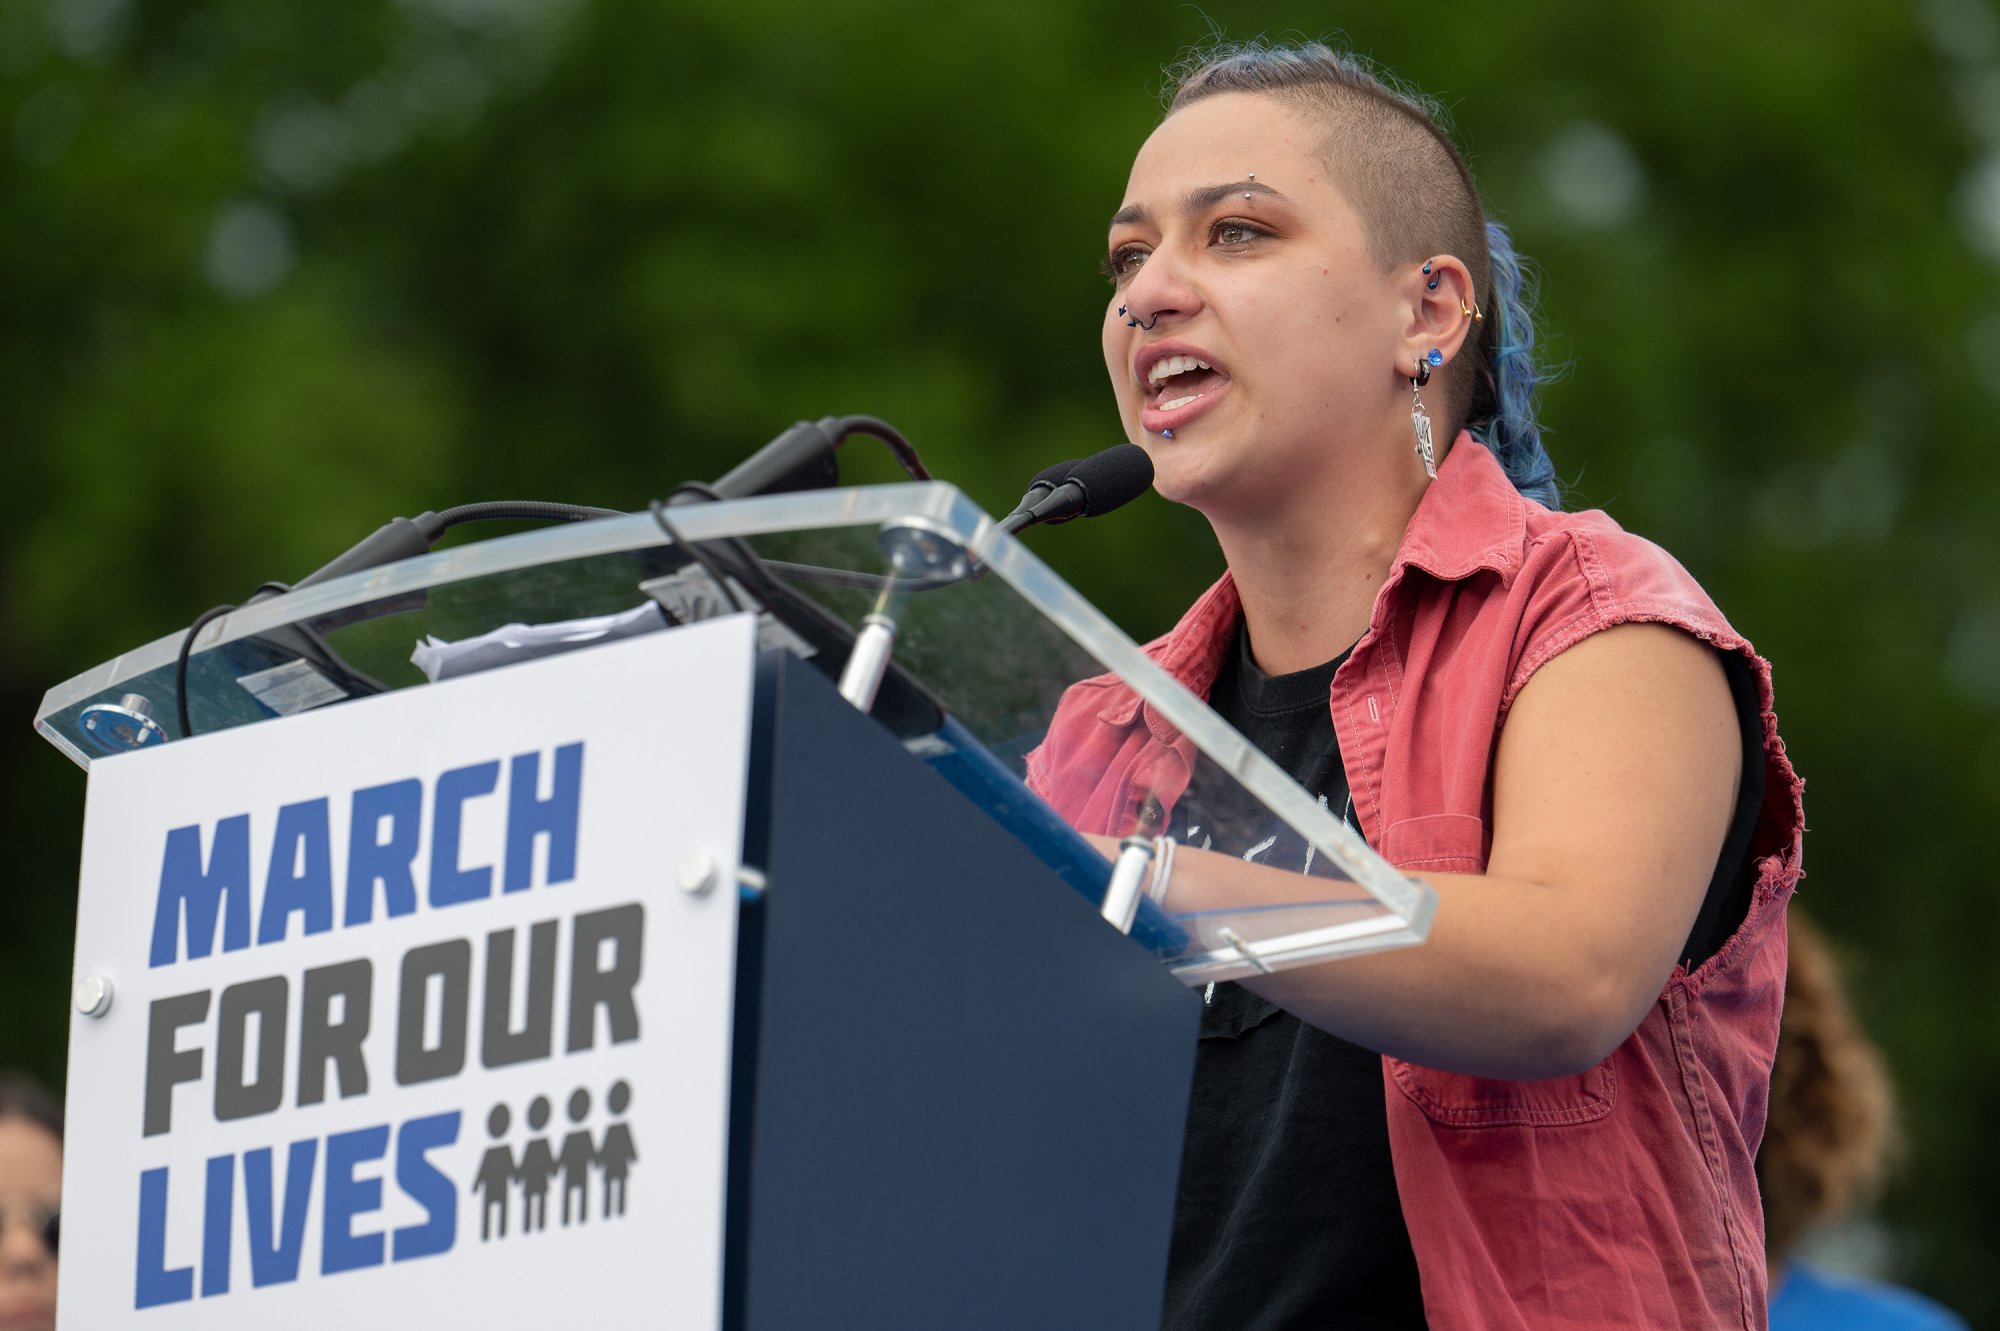 march for our lives co-founder x gonzalez speaks at podium with march for our lives logo on it